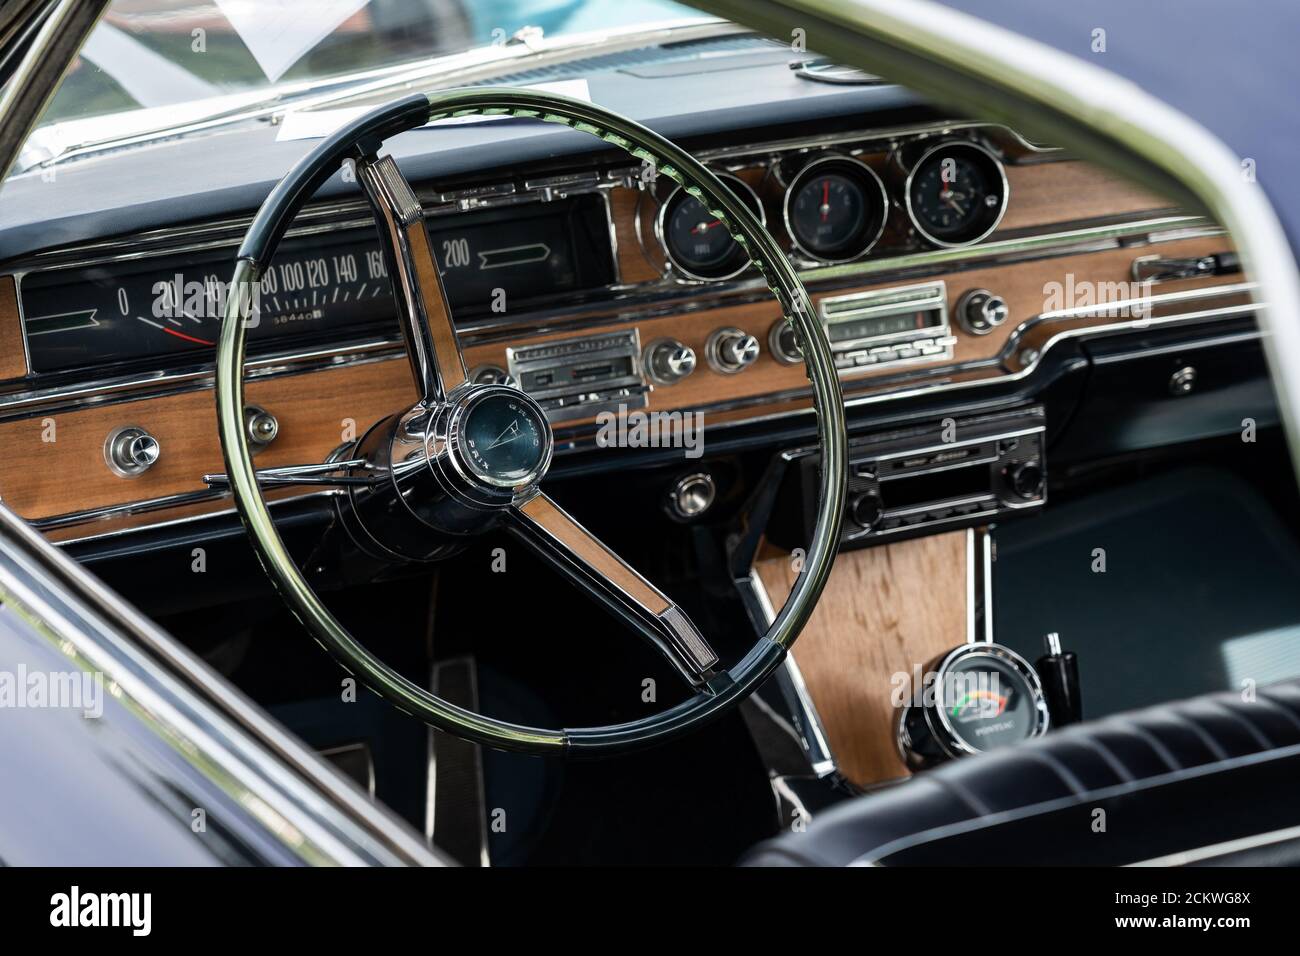 DIEDERSDORF, GERMANY - AUGUST 30, 2020: The interior of the personal luxury car Pontiac Grand Prix, 1965. The exhibition of 'US Car Classics'. Stock Photo